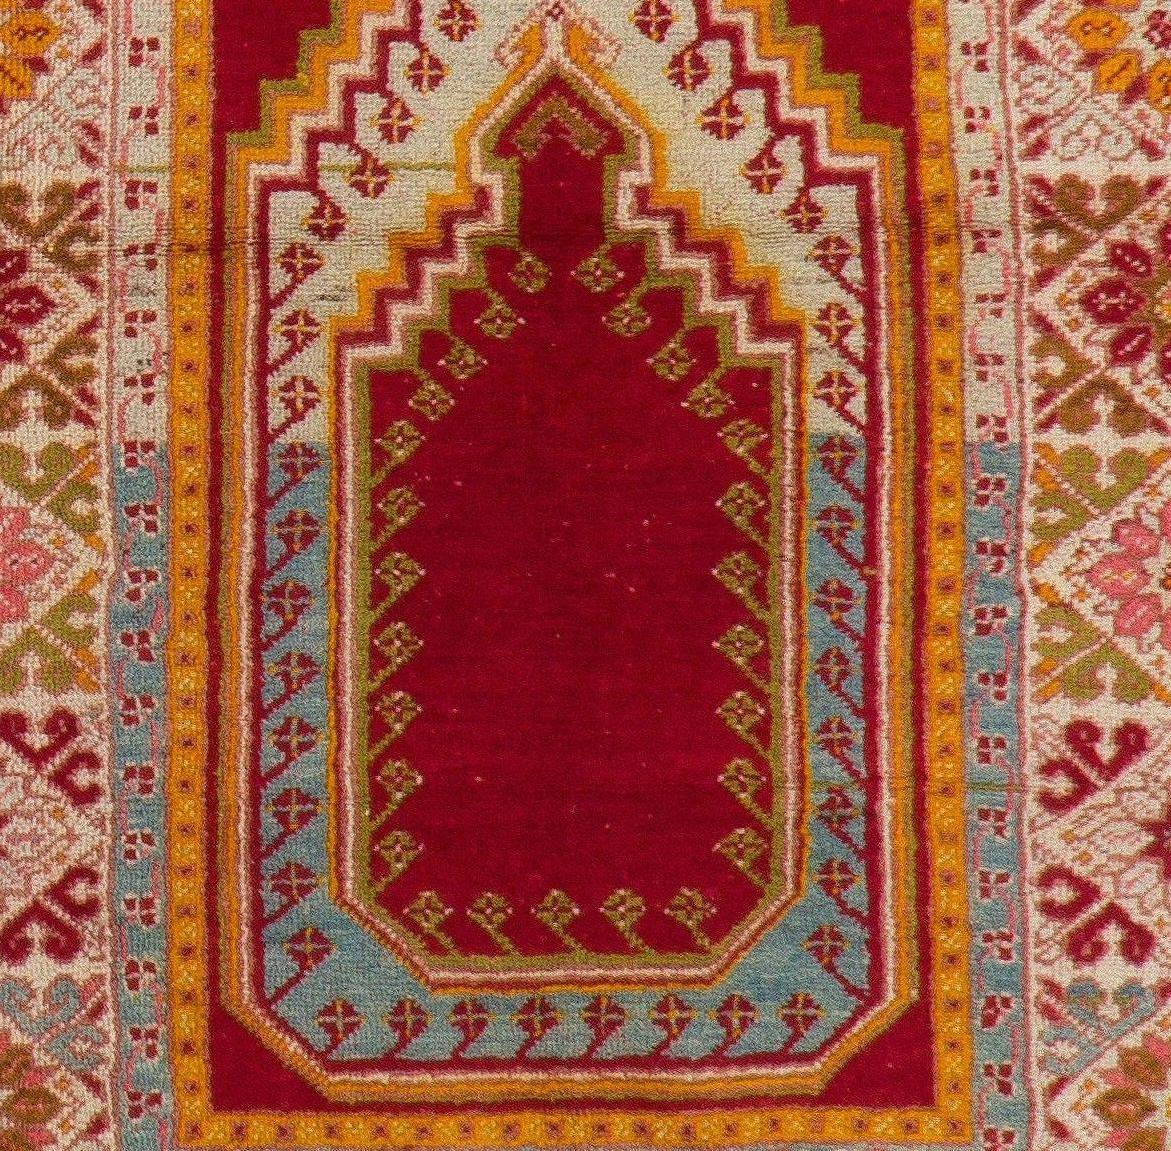 Hand-Knotted 3.3x5.3 Ft Semi Antique Turkish Kirsheir Prayer Rug, circa 1940 For Sale